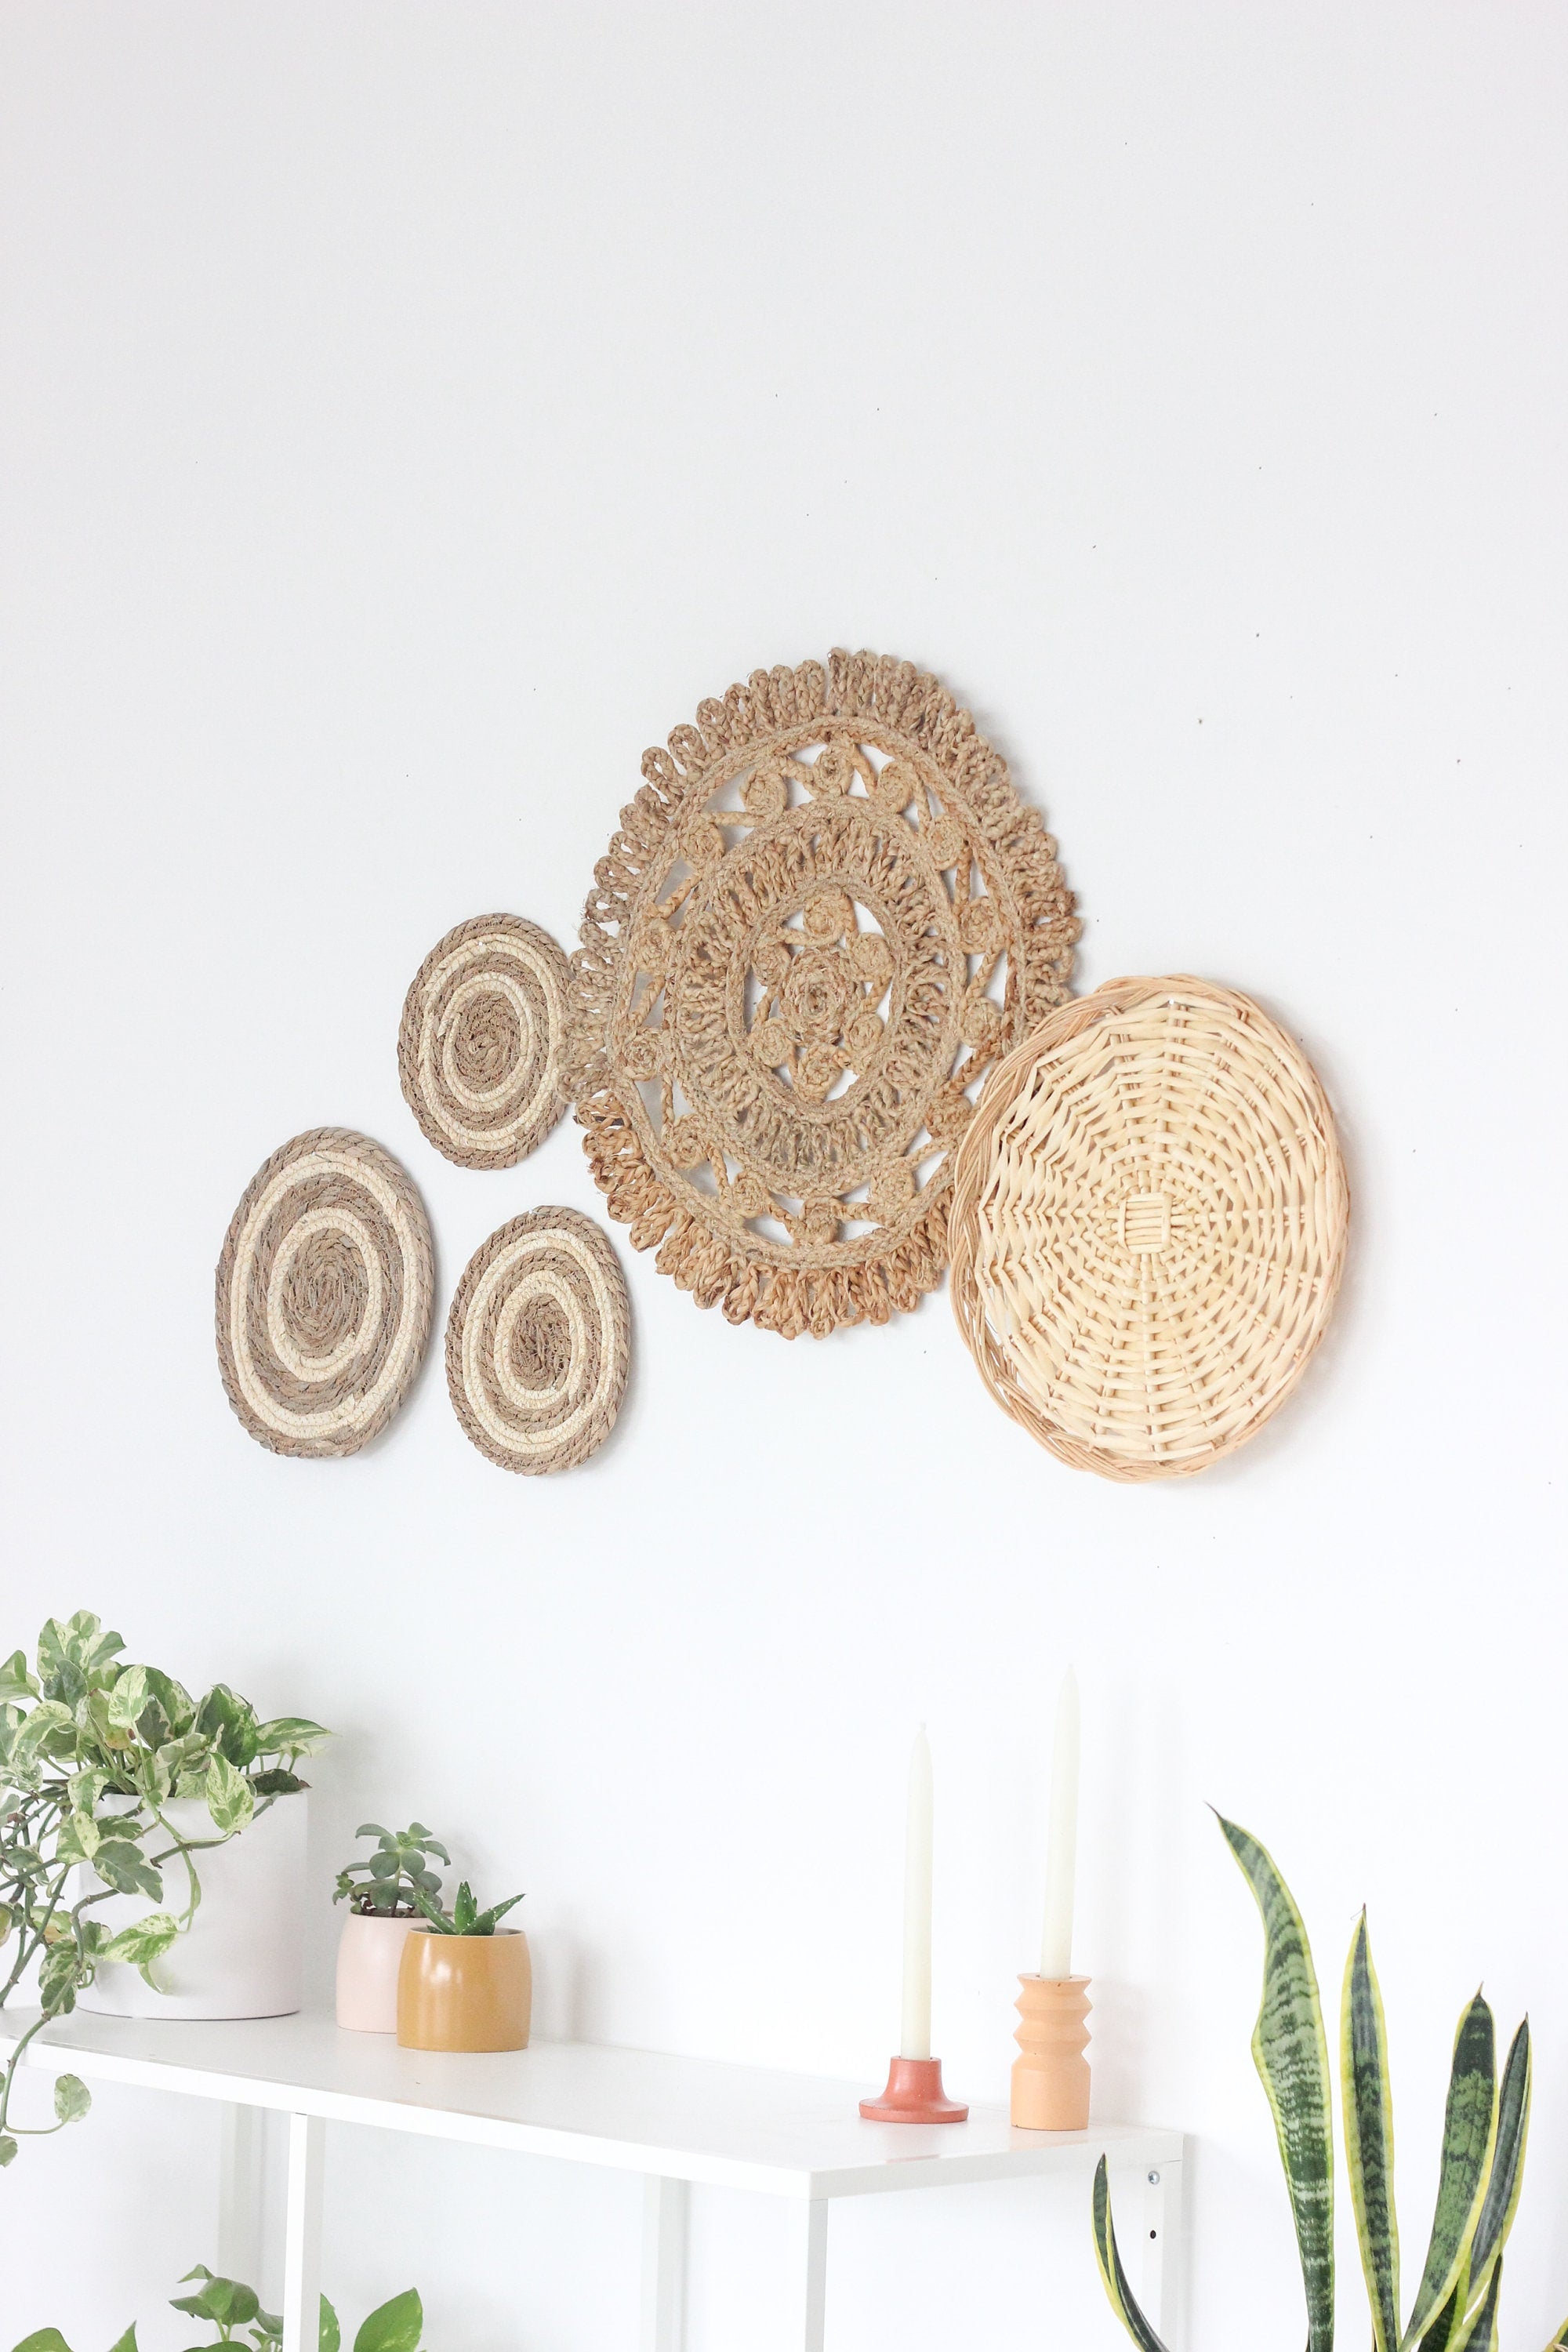 Sunset Wall Hanging Mix Curated Wall Baskets Set